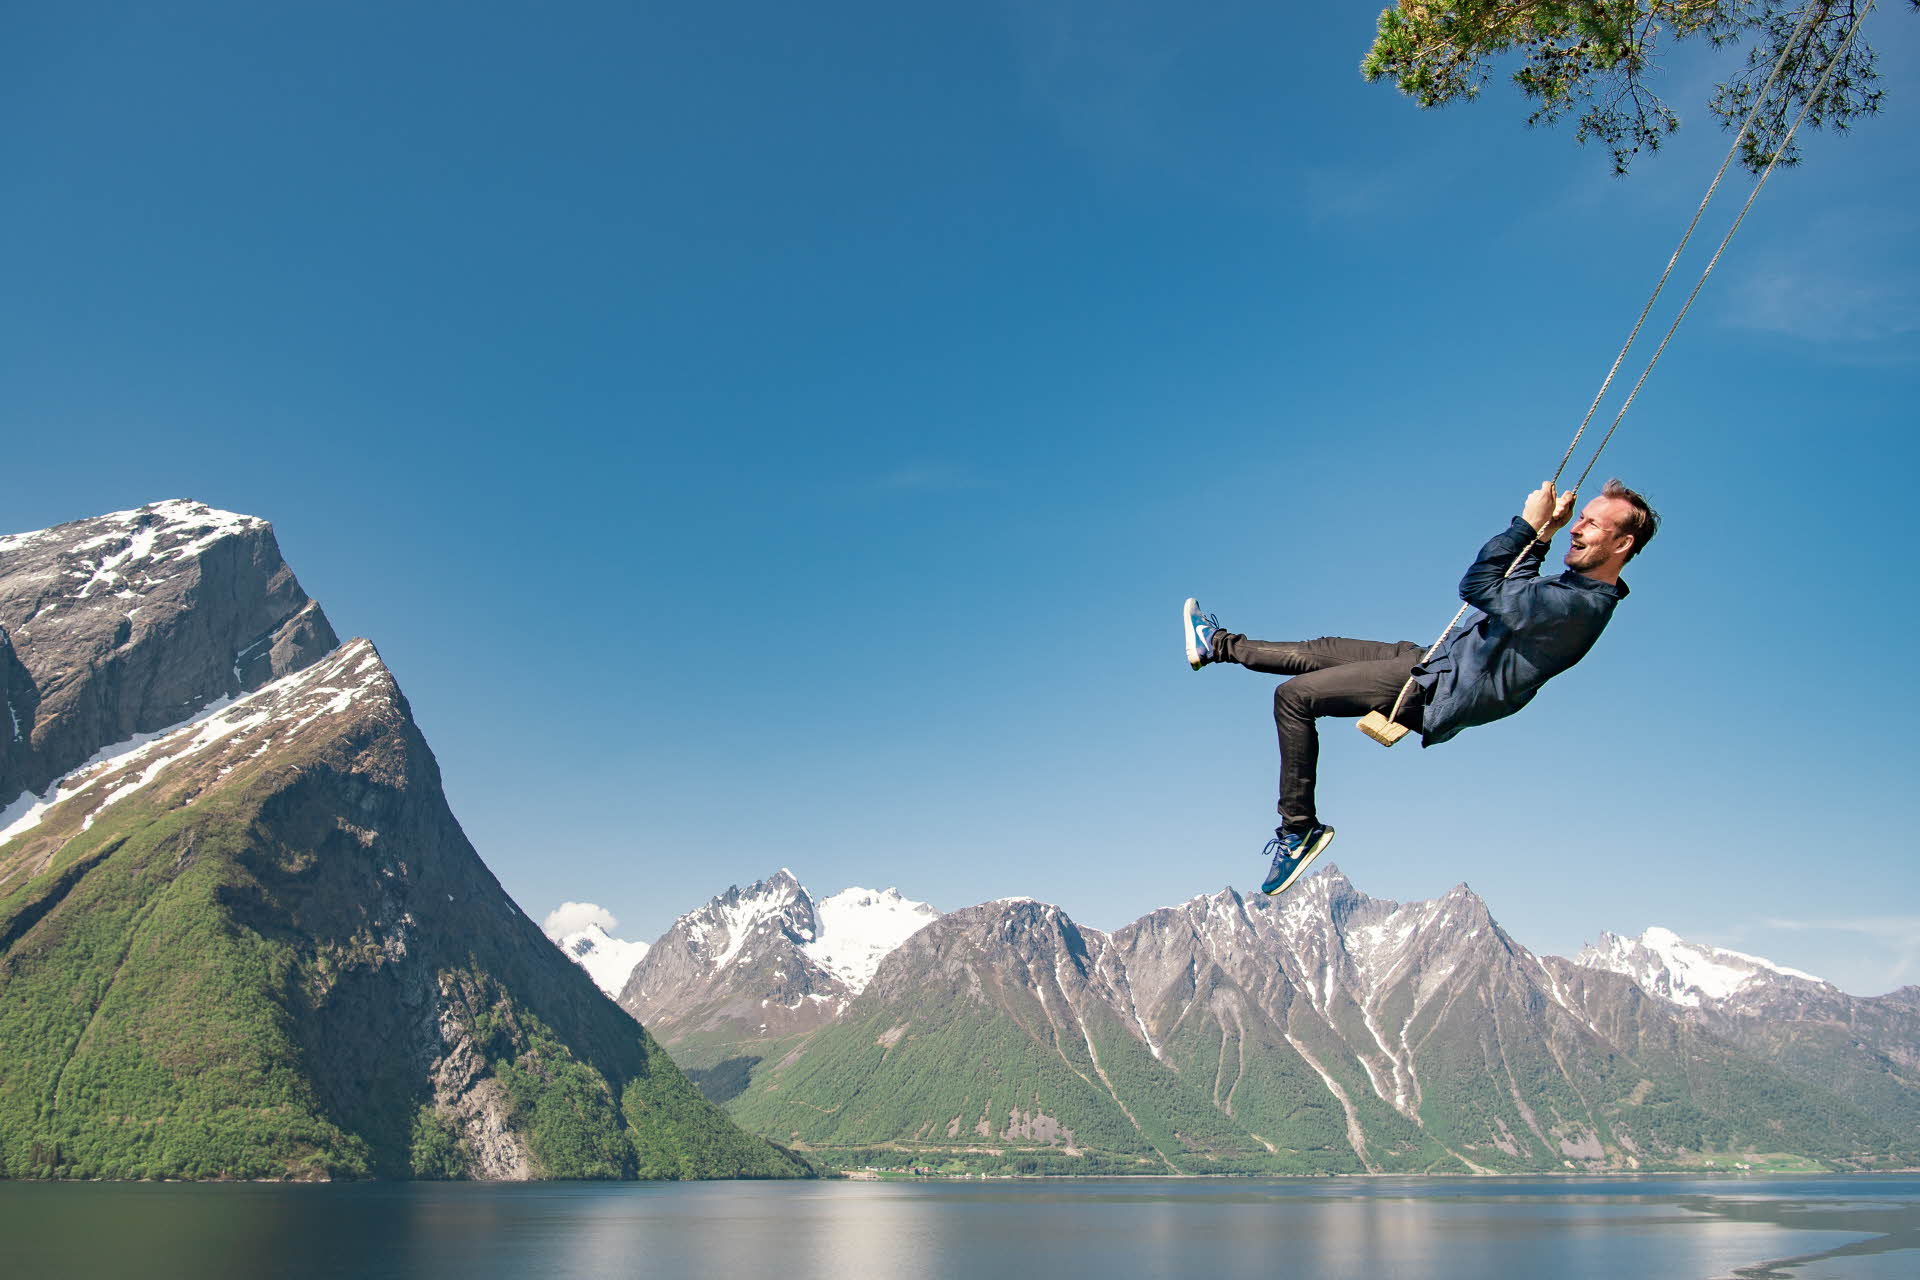 A man on a swing above the Hjørundfjord. The Sunnmøre Alps with patches of snow in the foreground.